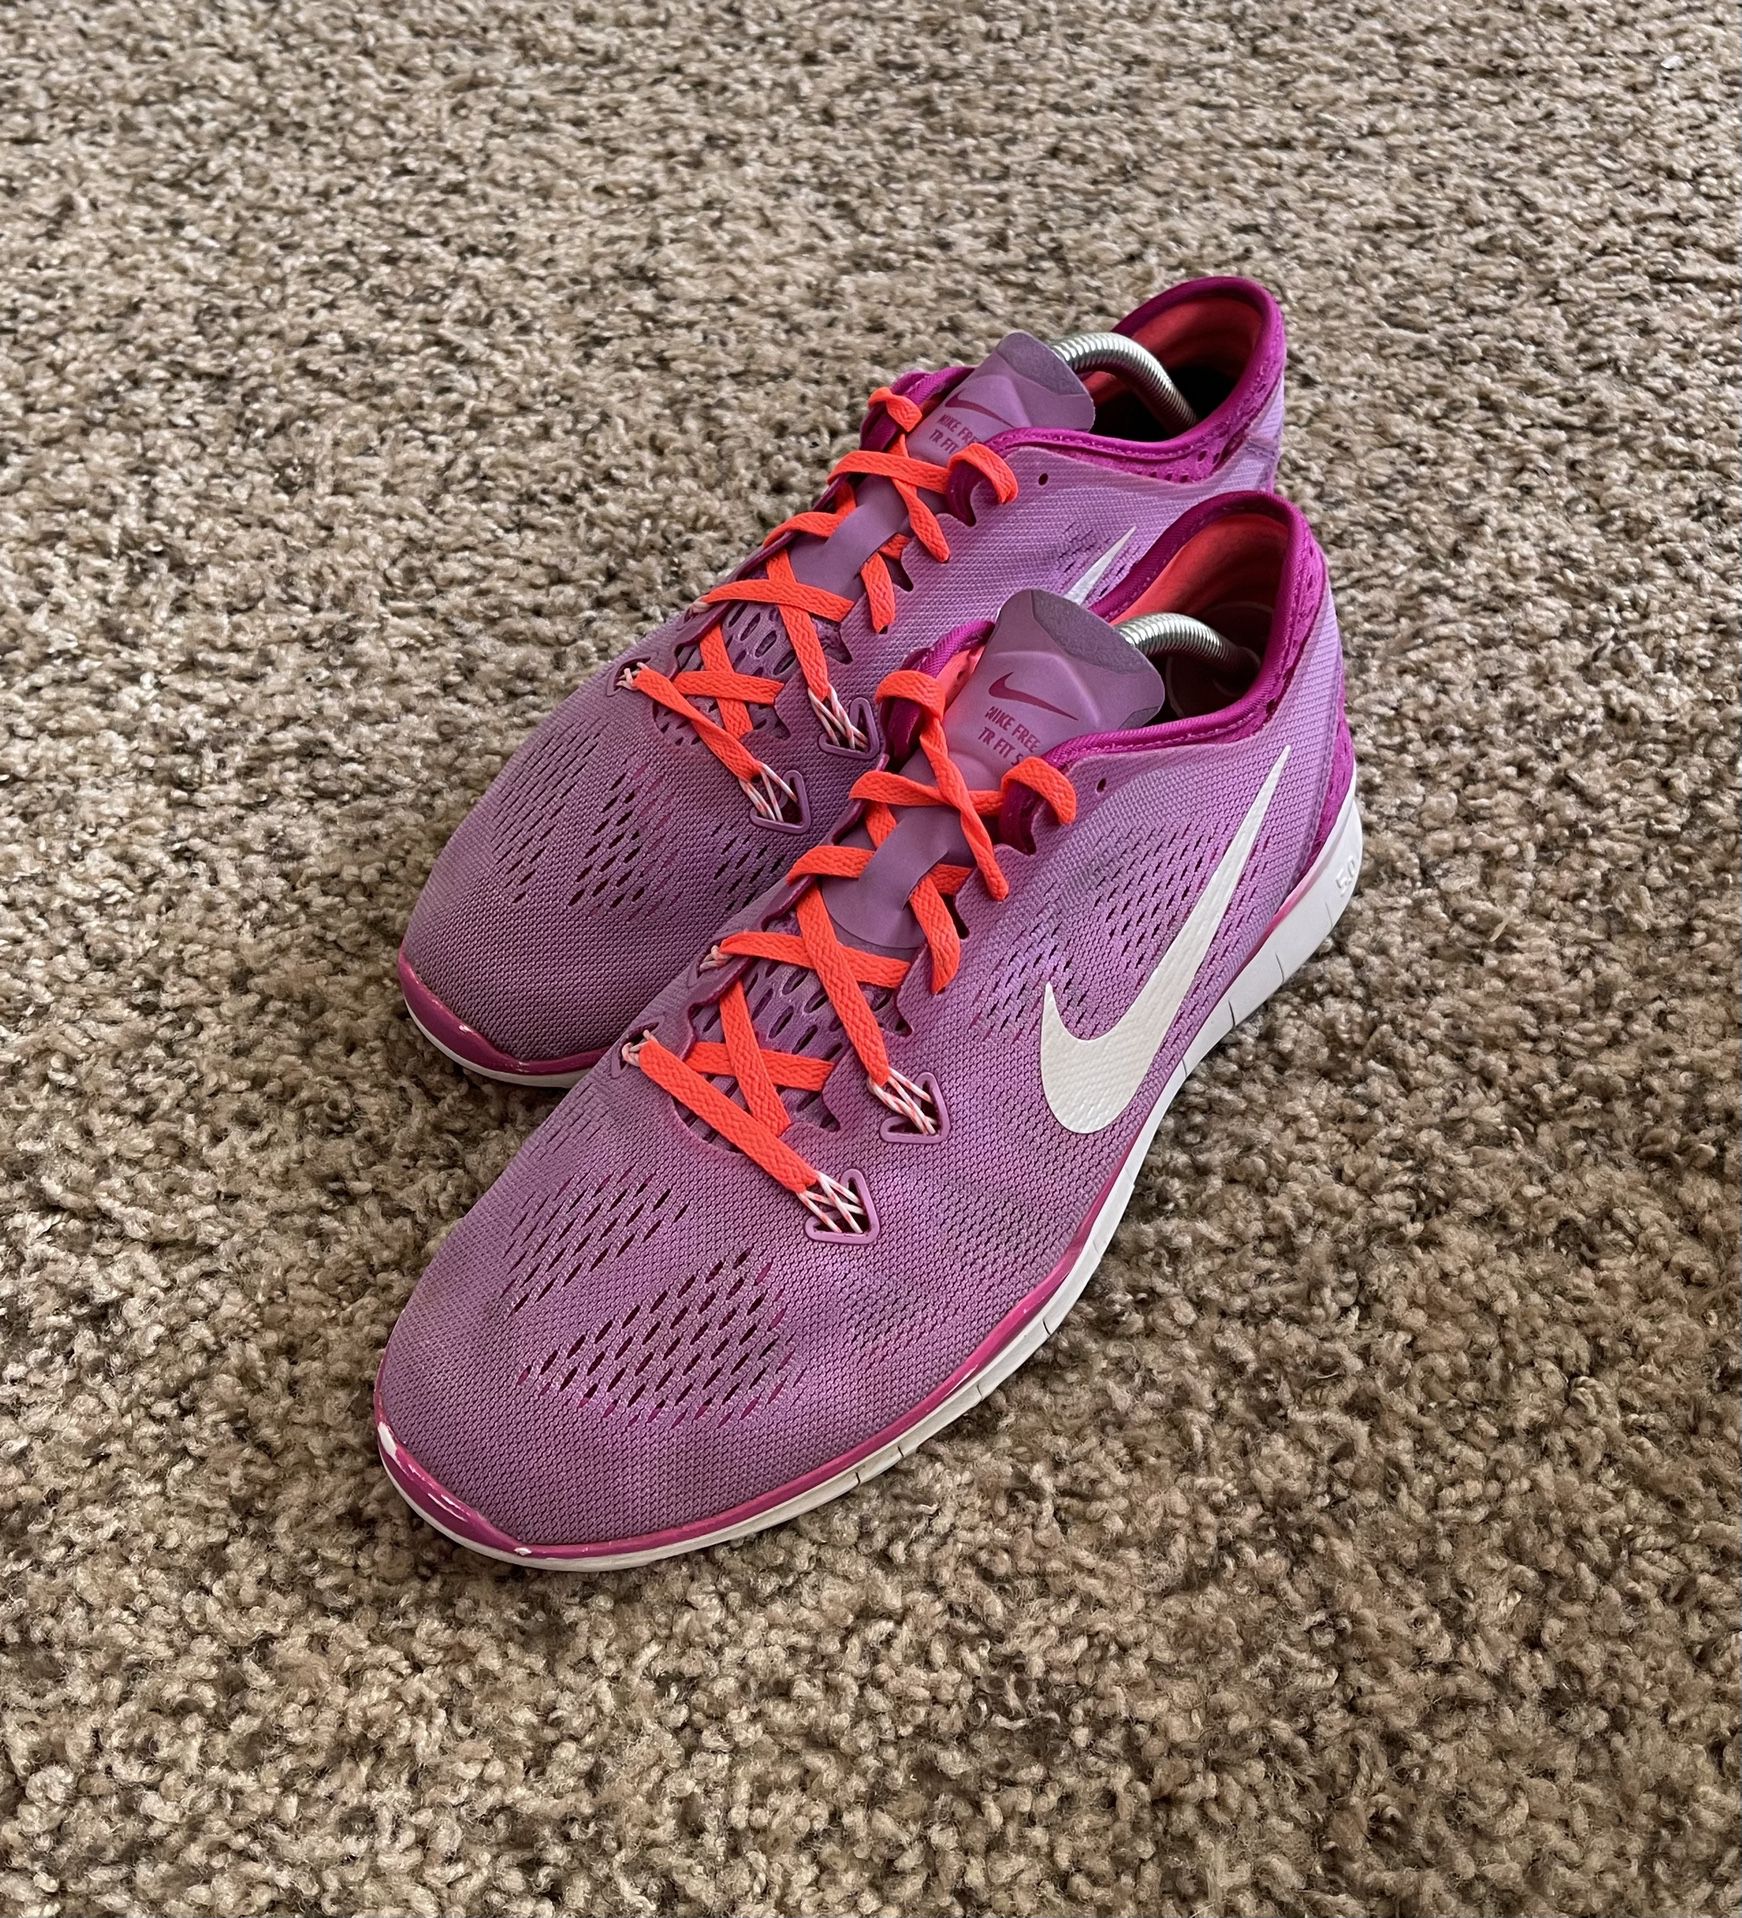 Nike Free TR Fit 5.0 Athletic Shoes Women's Size 10 Sale in Dallas, TX - OfferUp